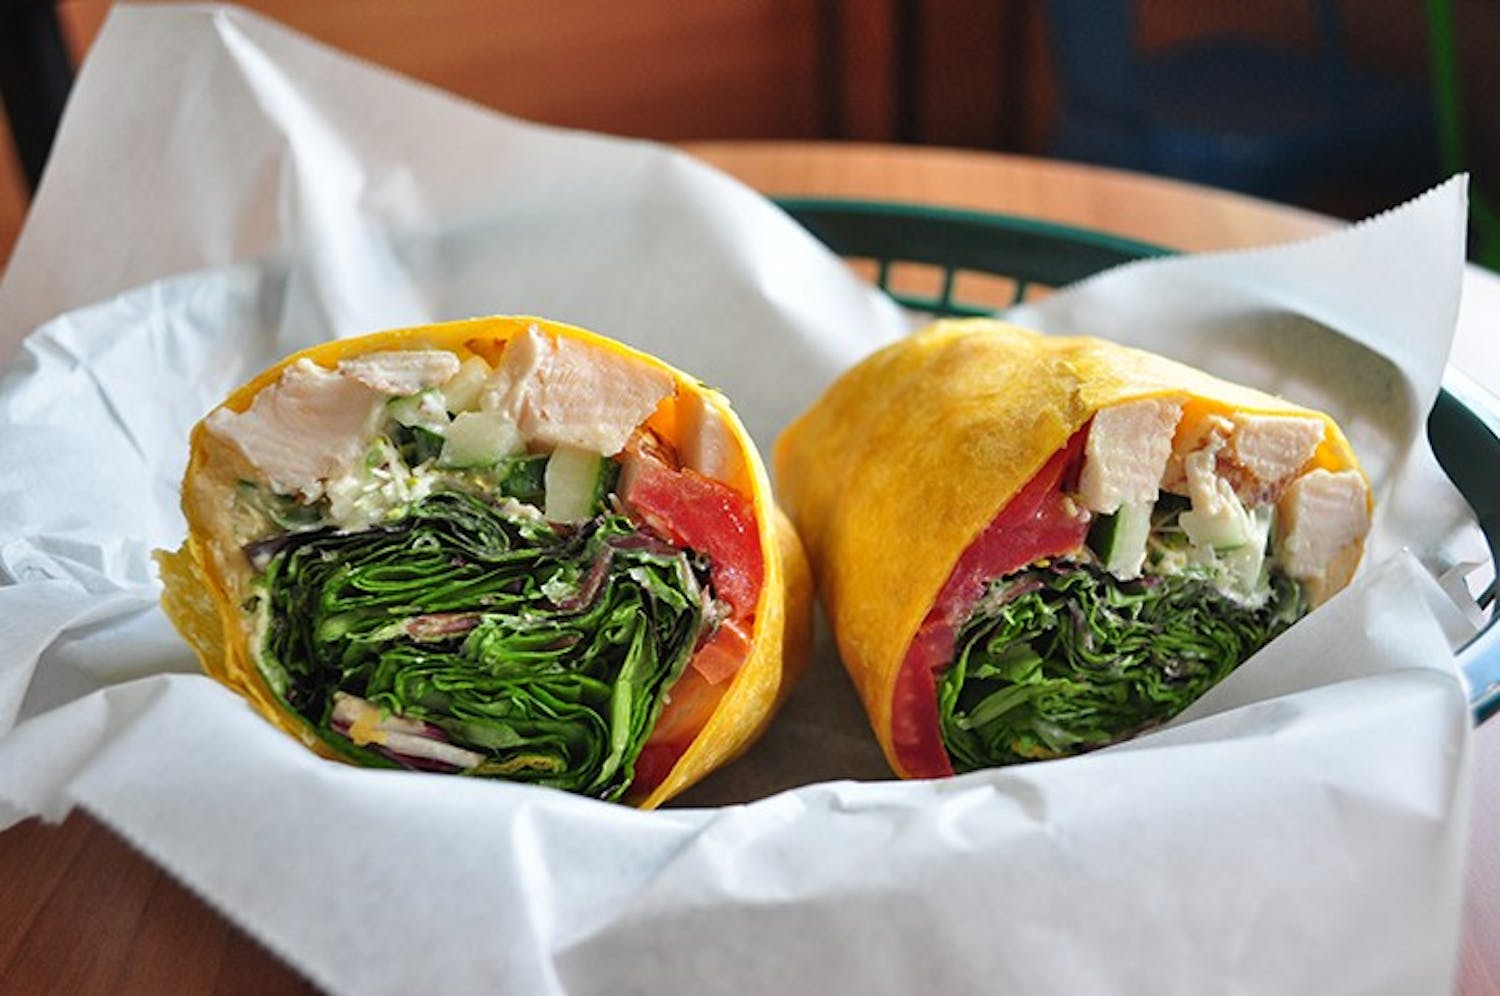 Black Bean Co, the Vista's newest culinary addition, brings a whole new meaning to the term "fast food".